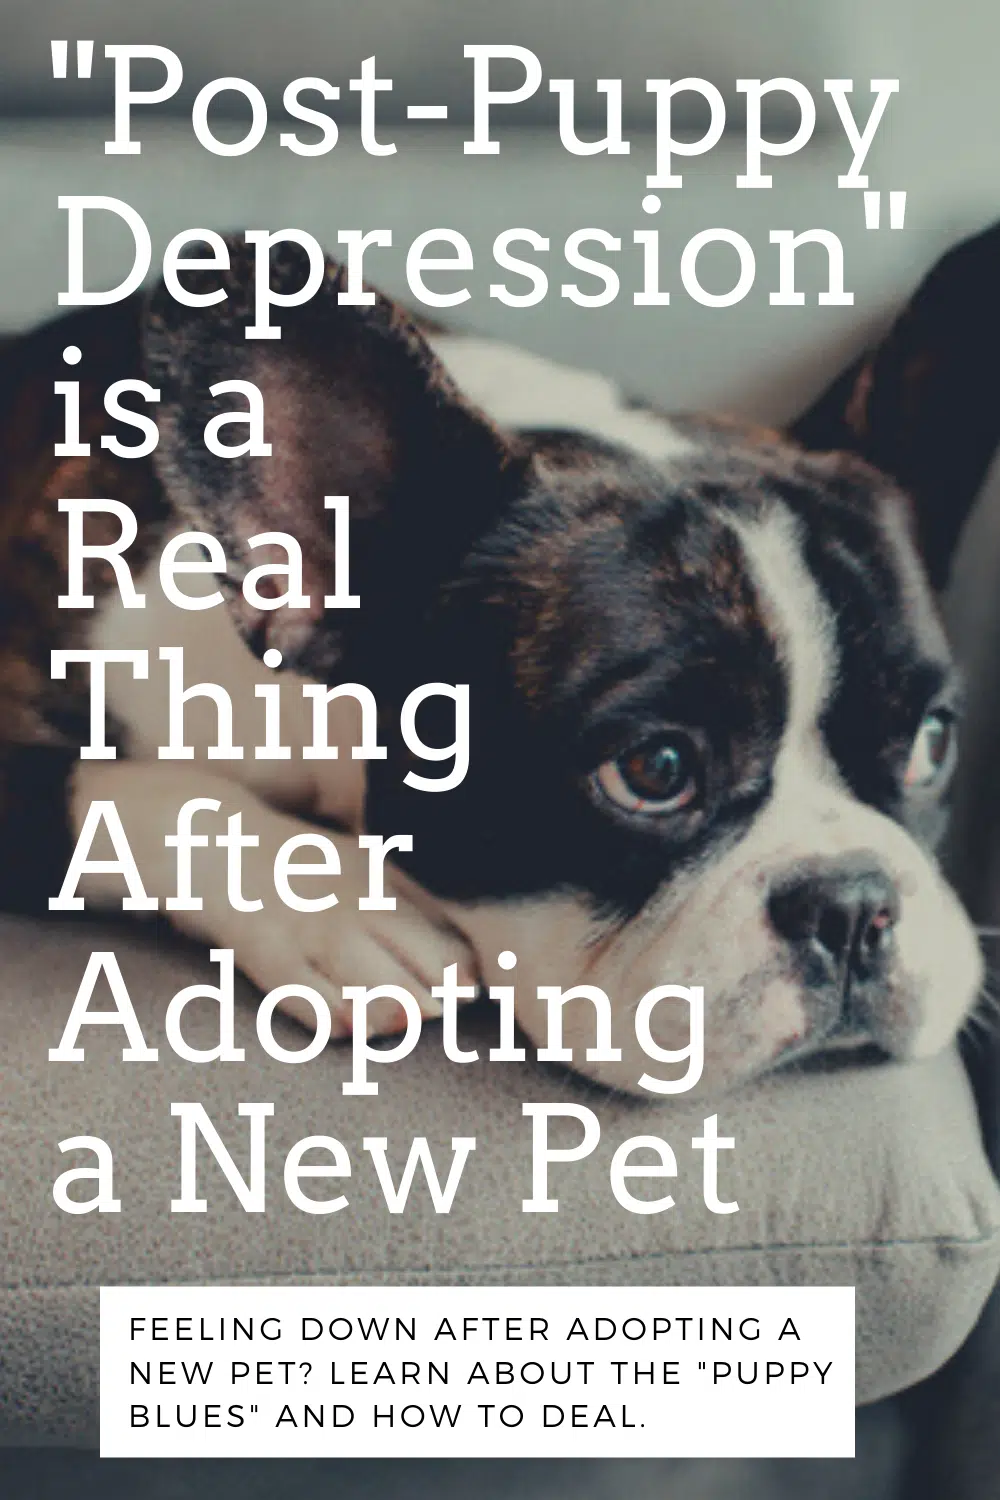 Post puppy depression symptoms, the puppy blues, depression after adopting a dog